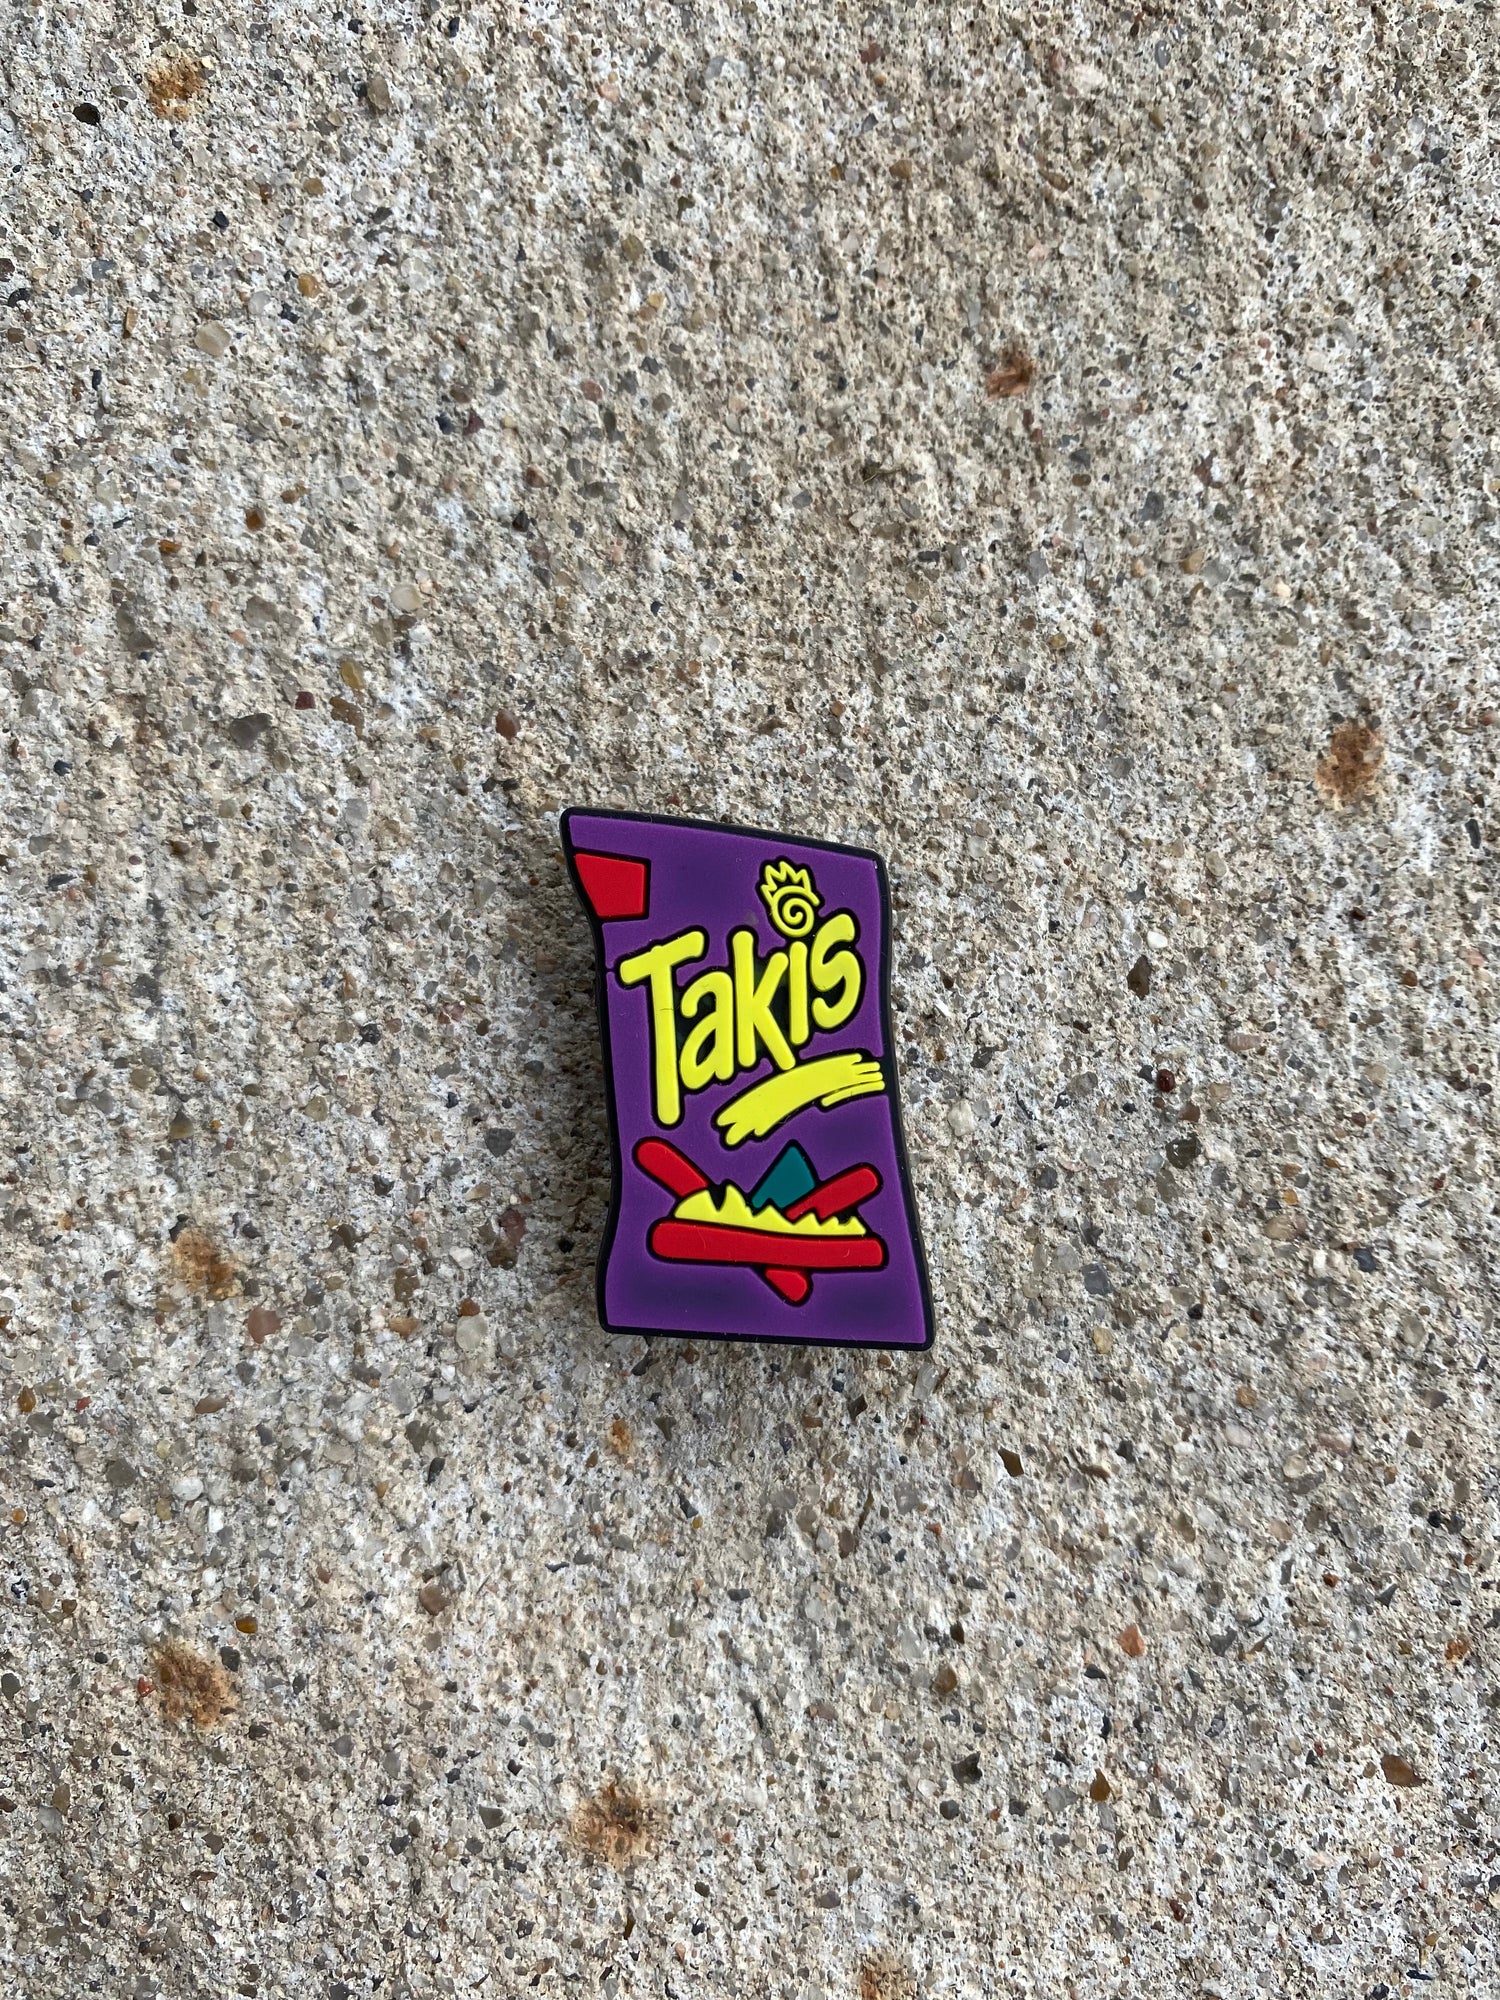 Takis Hot chips croc shoe charms charm gift 